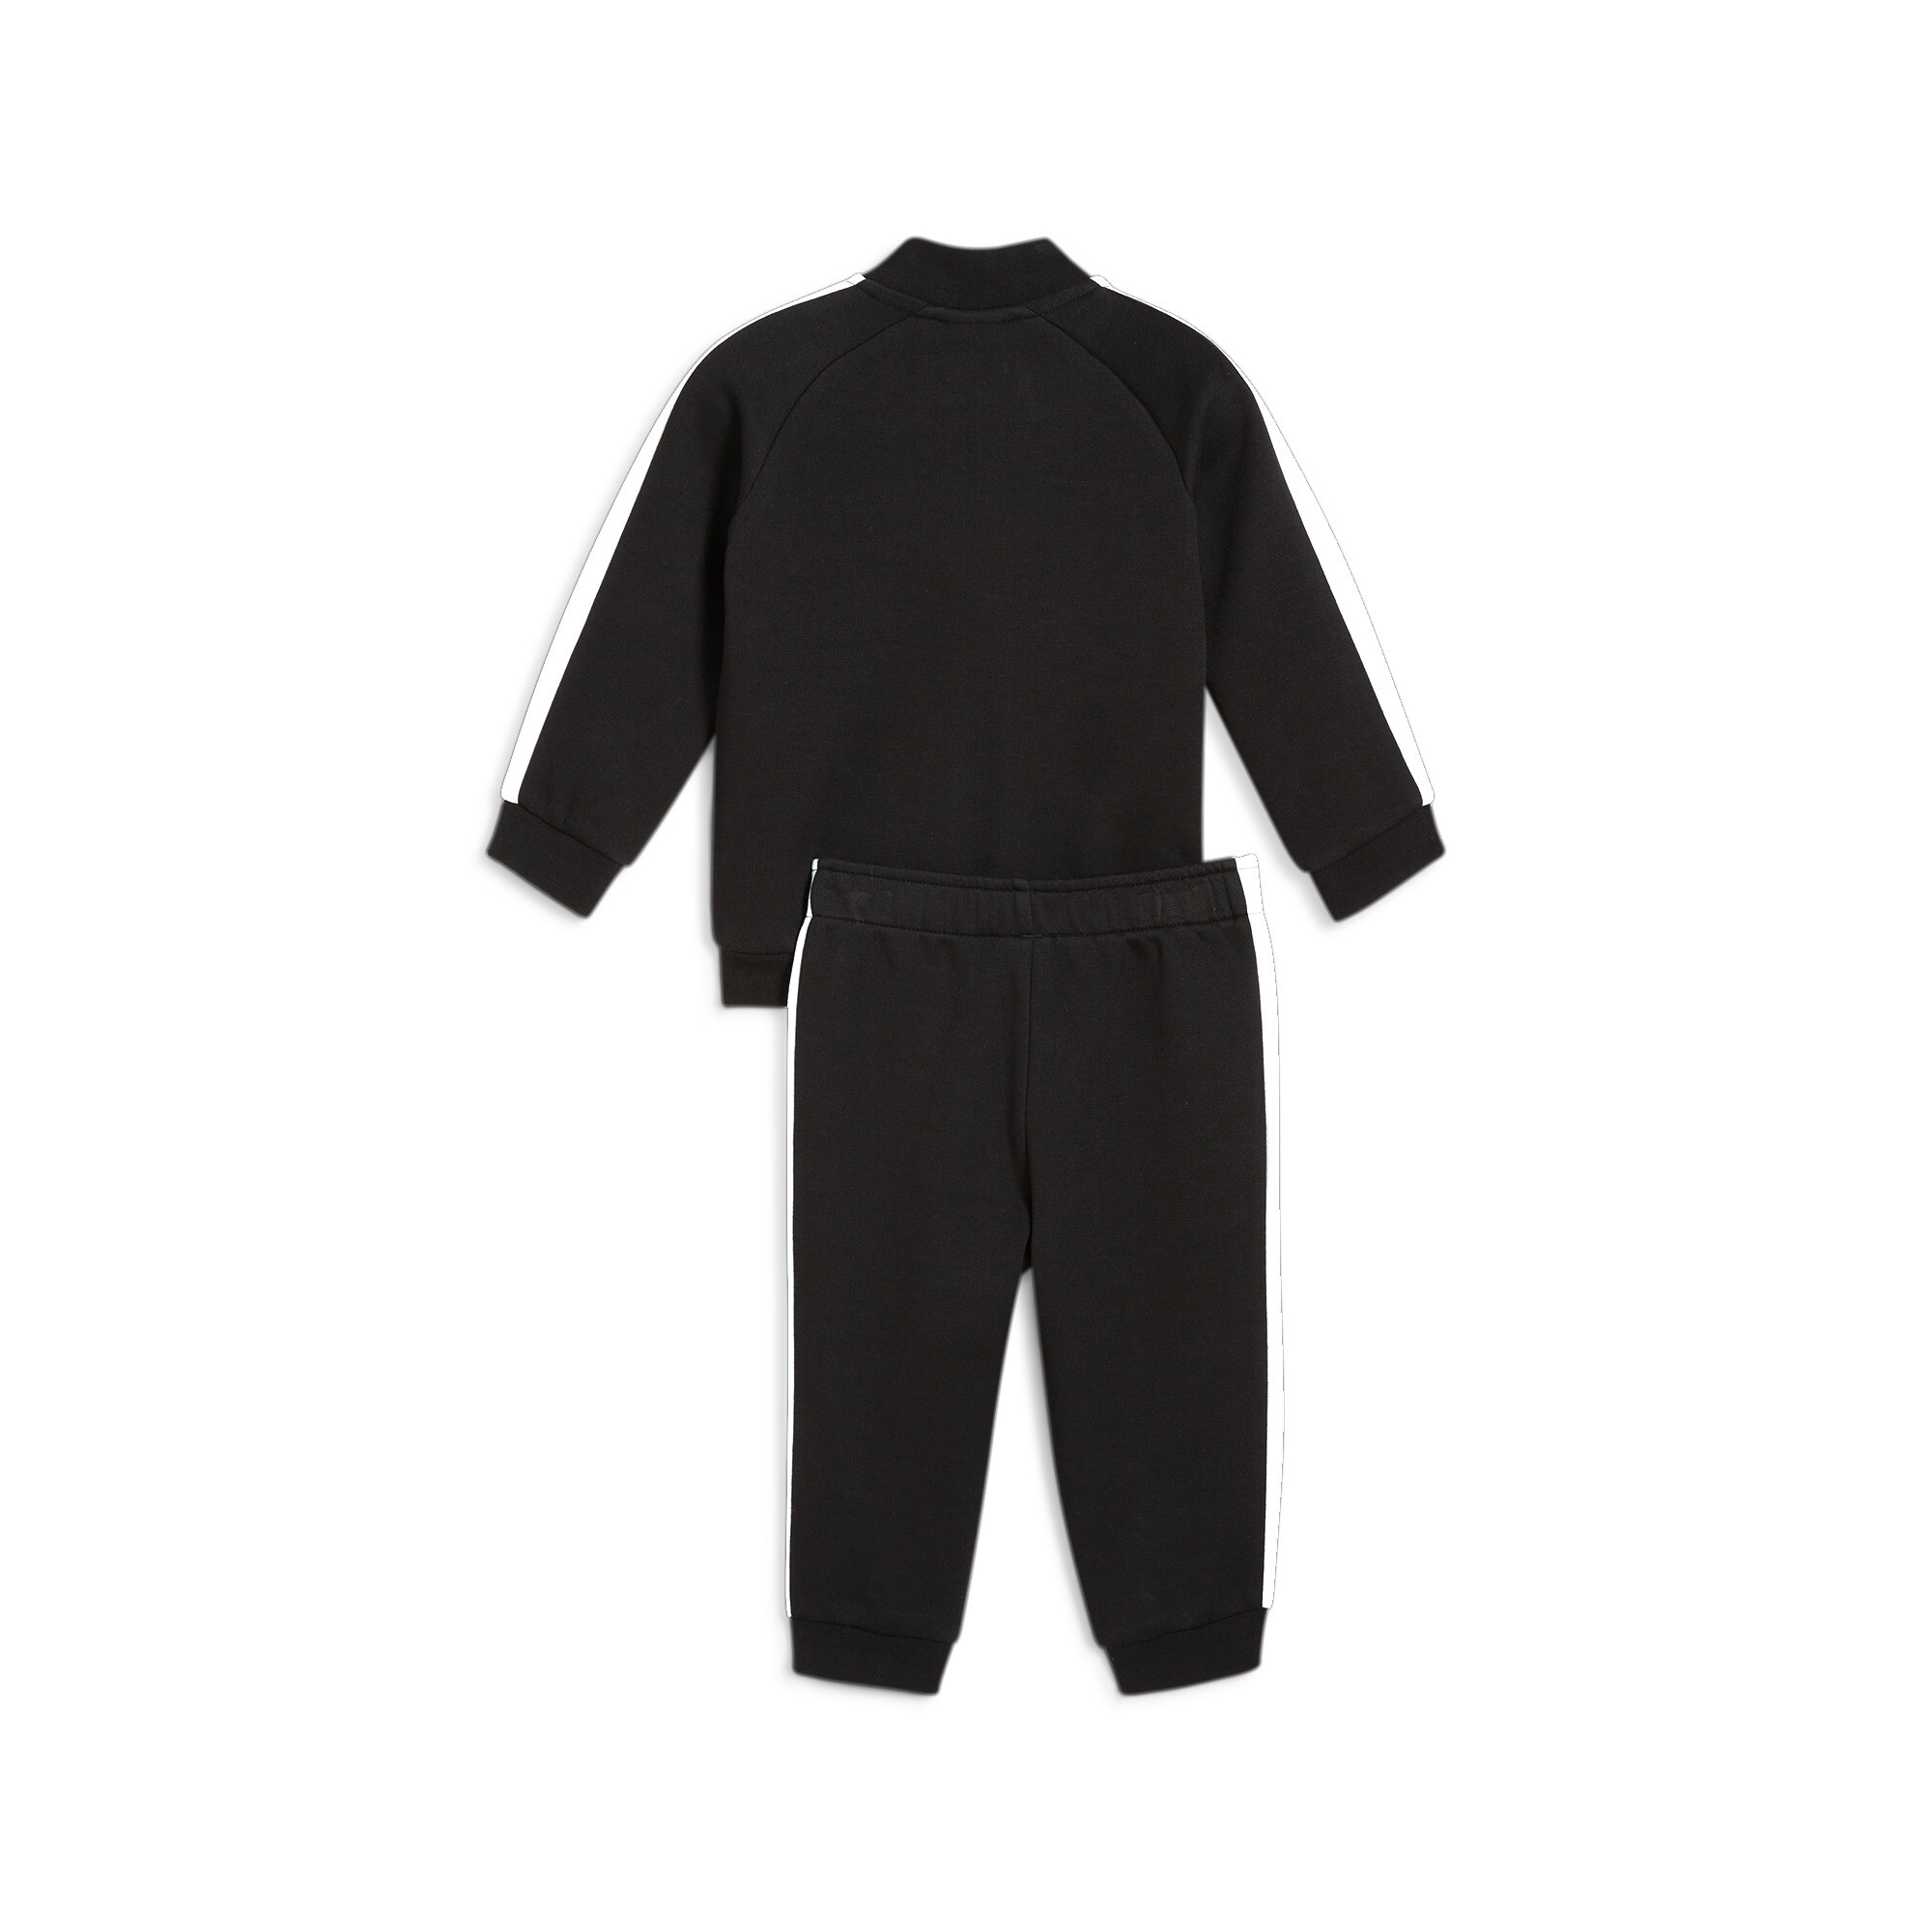 PUMA MINICATS T7 ICONIC Baby Tracksuit Set In Black, Size 3-4 Youth